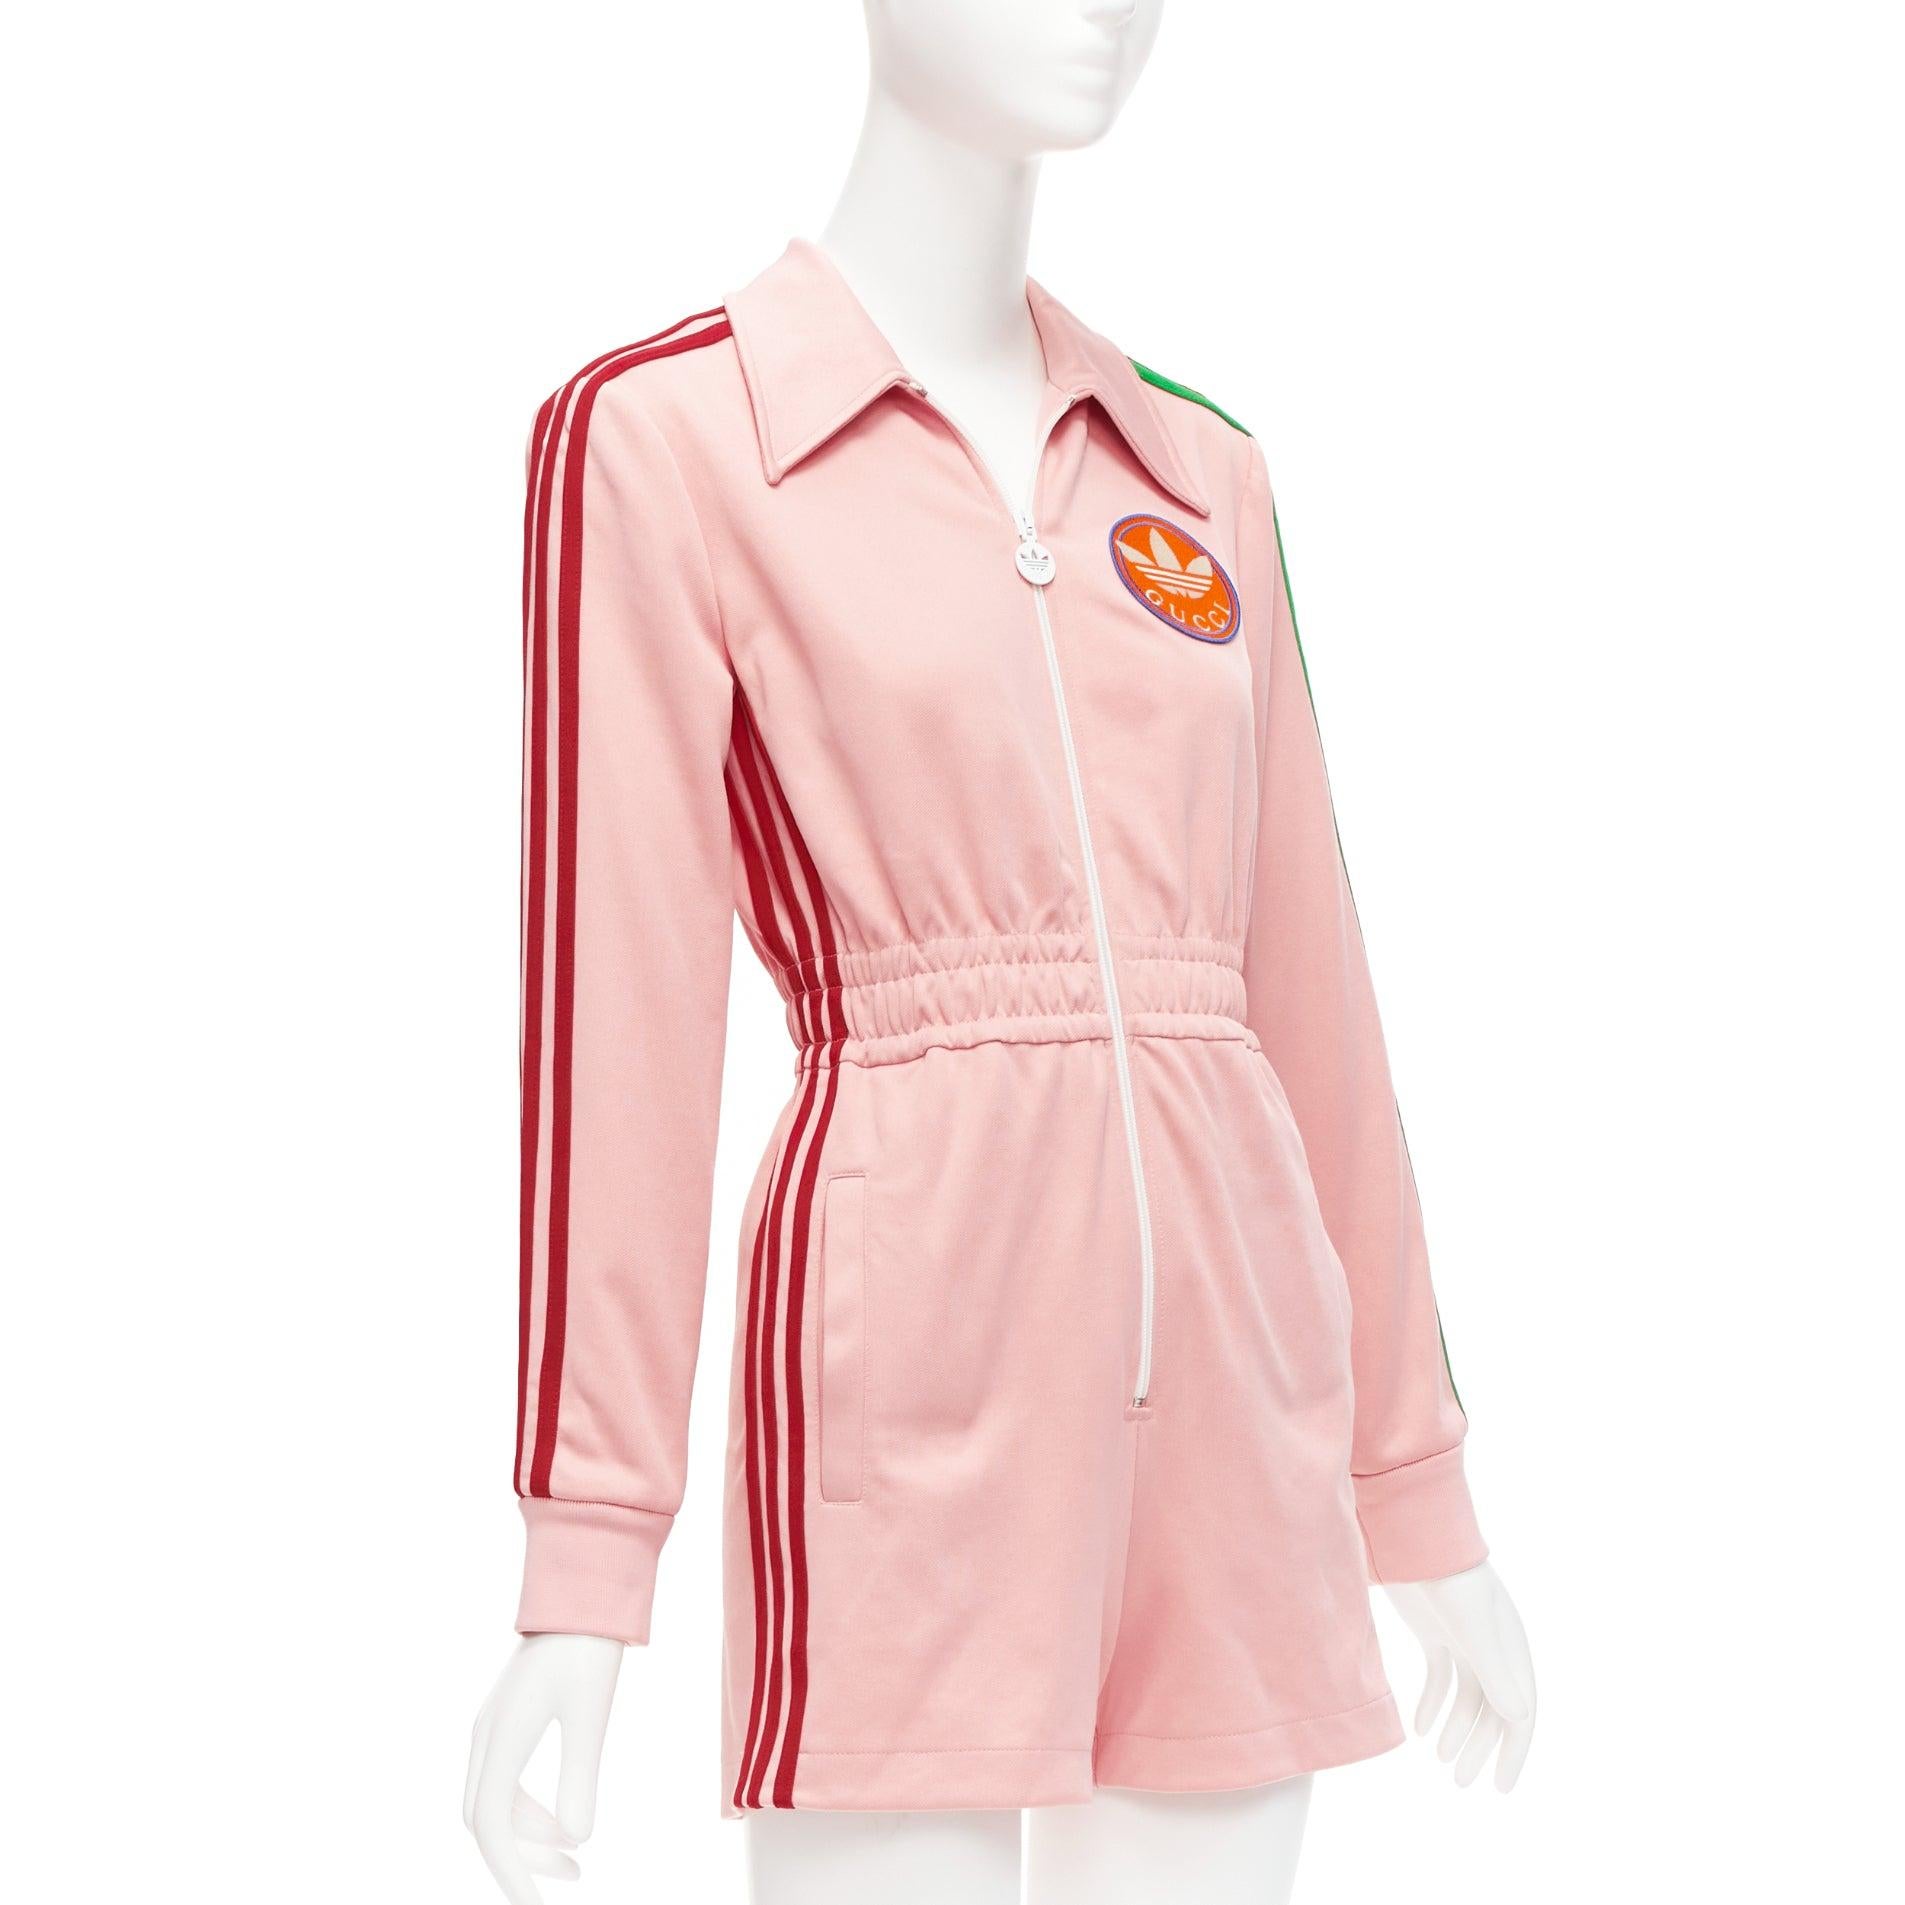 GUCCI Adidas 2022 pink orange logo pique stripes long sleeve zip romper XS
Reference: AAWC/A00690
Brand: Gucci
Designer: Alessandro Michele
Model: 697274 XJEAZ 3778
Collection: 2022 Adidas
Material: Polyester, Blend
Color: Pink
Pattern: